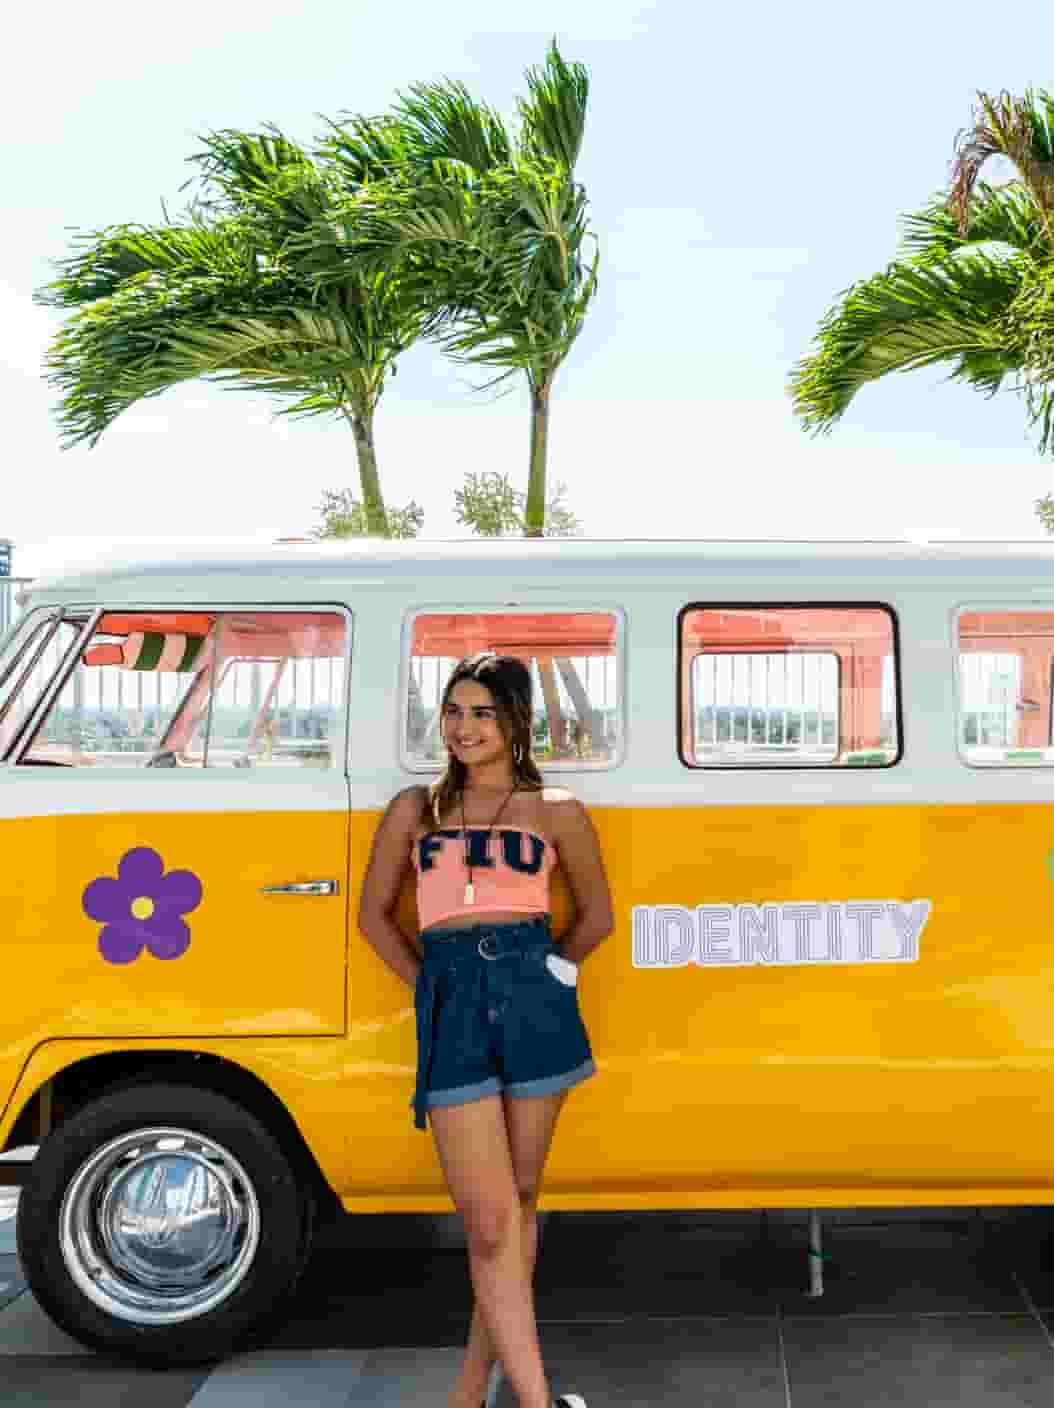 Identity Miami student resident with the Identity Bus